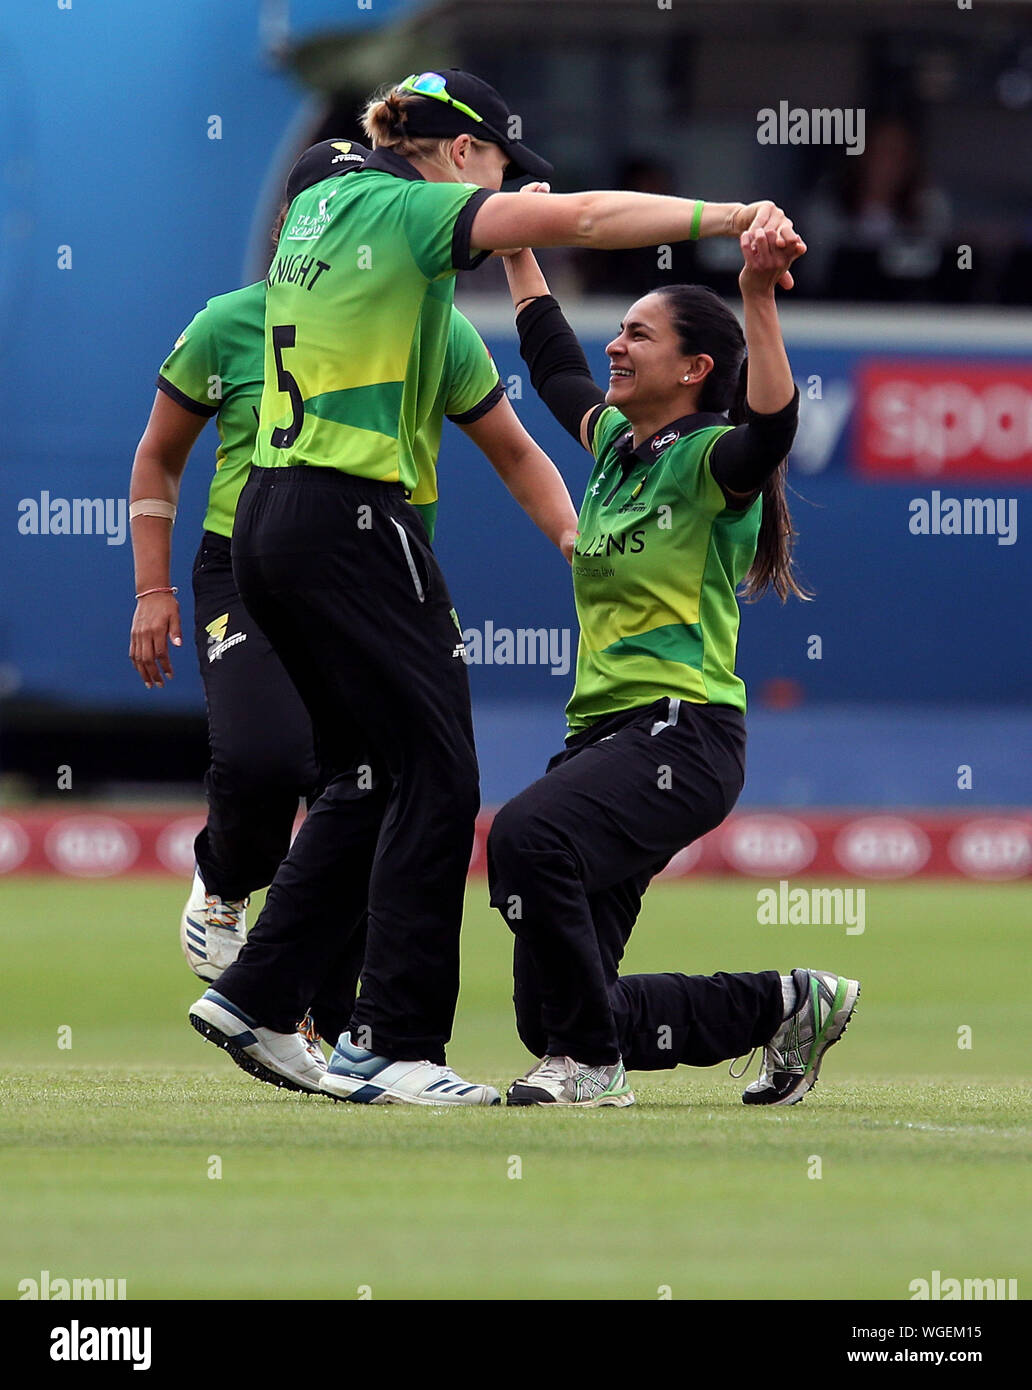 Western Storm Sonia Odedra celebrates with team-mates after catching out Southern Vipers Suzie Bates (not in picture) during Kia Super League final at the 1st Central County Ground, Hove. Stock Photo